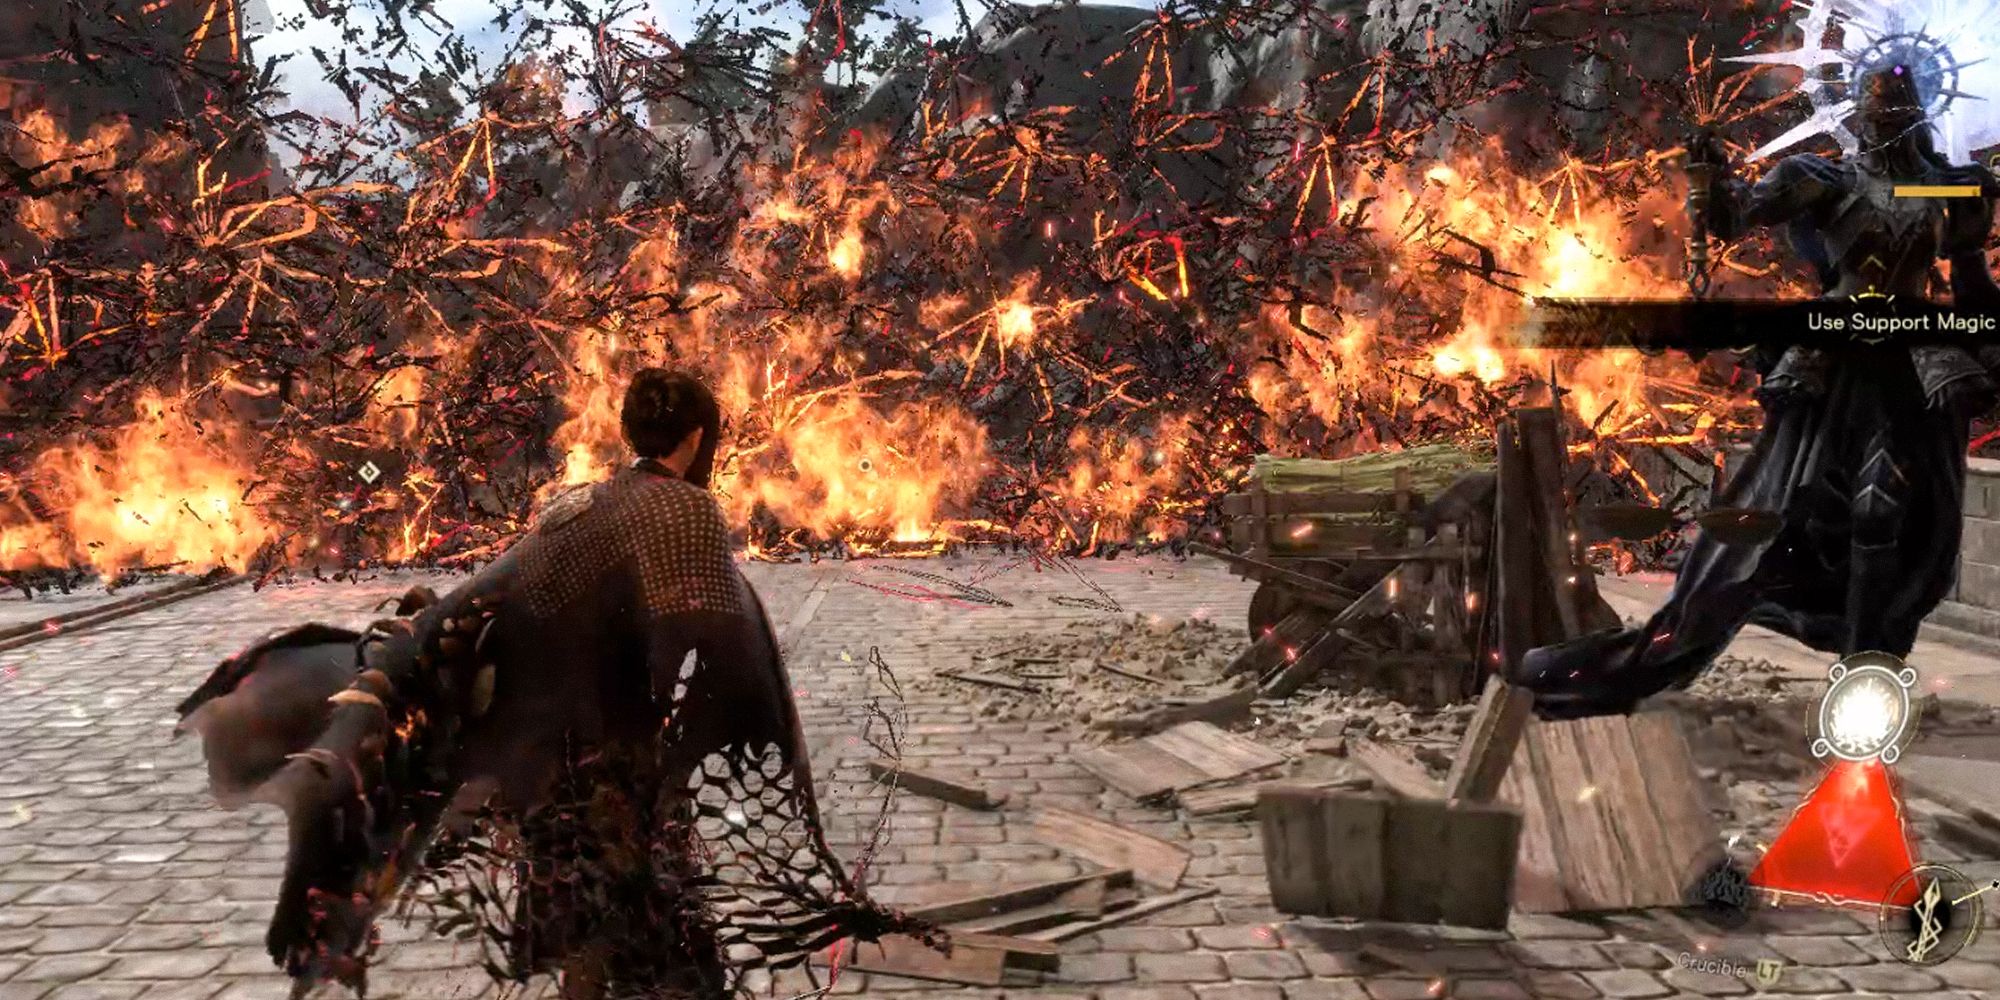 Frey using the Crucible spell to create a wall of fire.